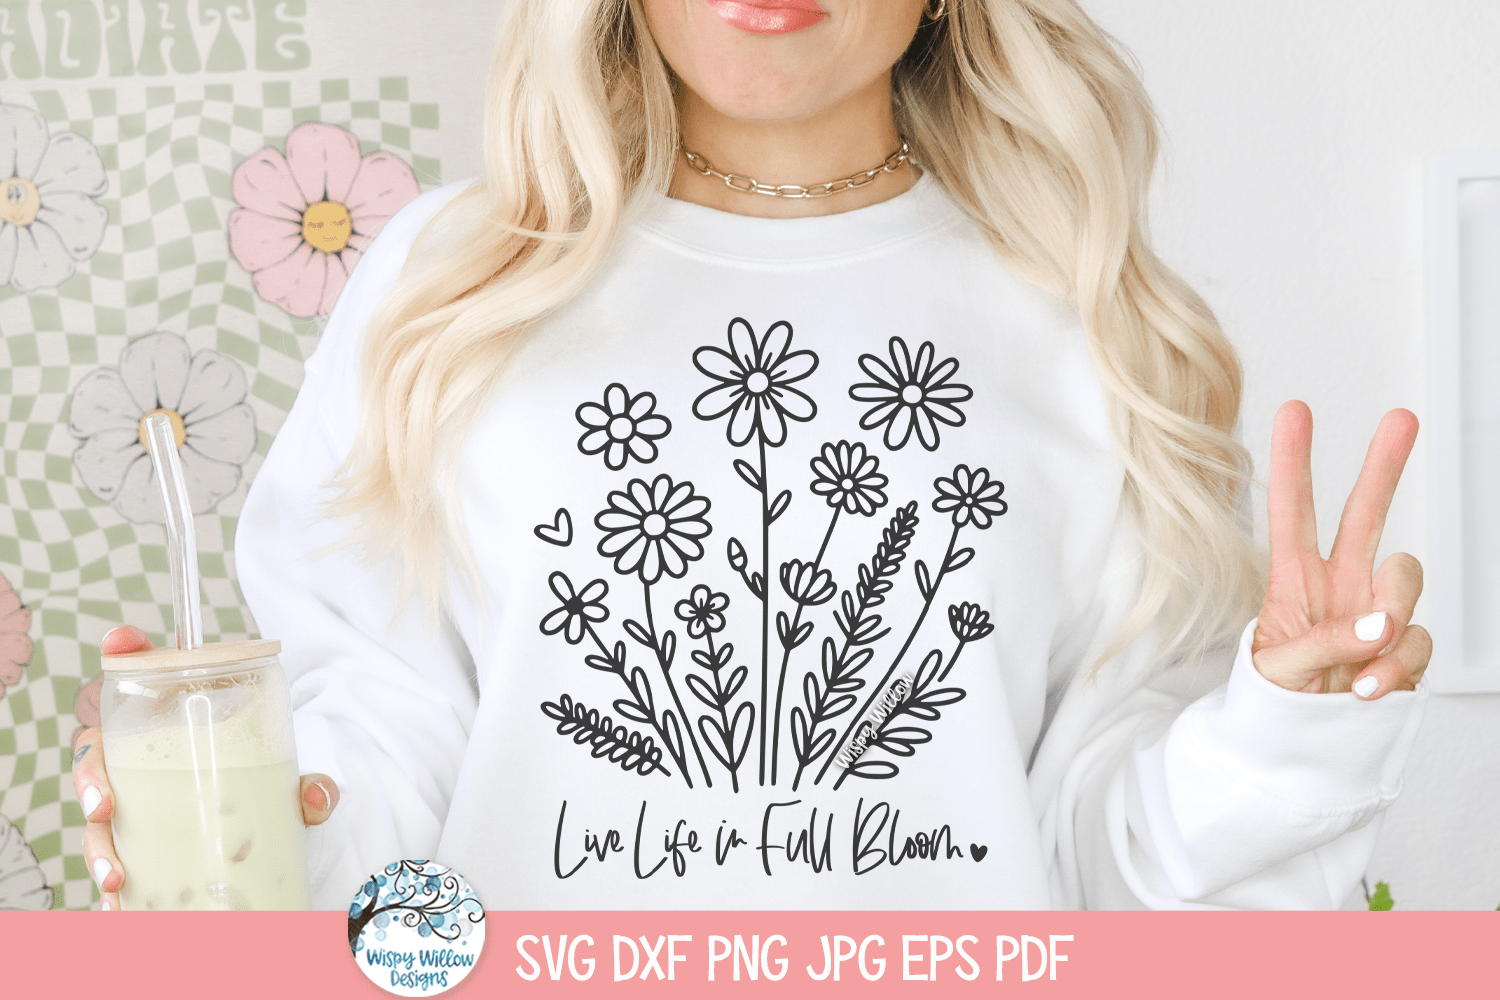 Live Life In Full Bloom SVG | Floral Illustration Wispy Willow Designs Company